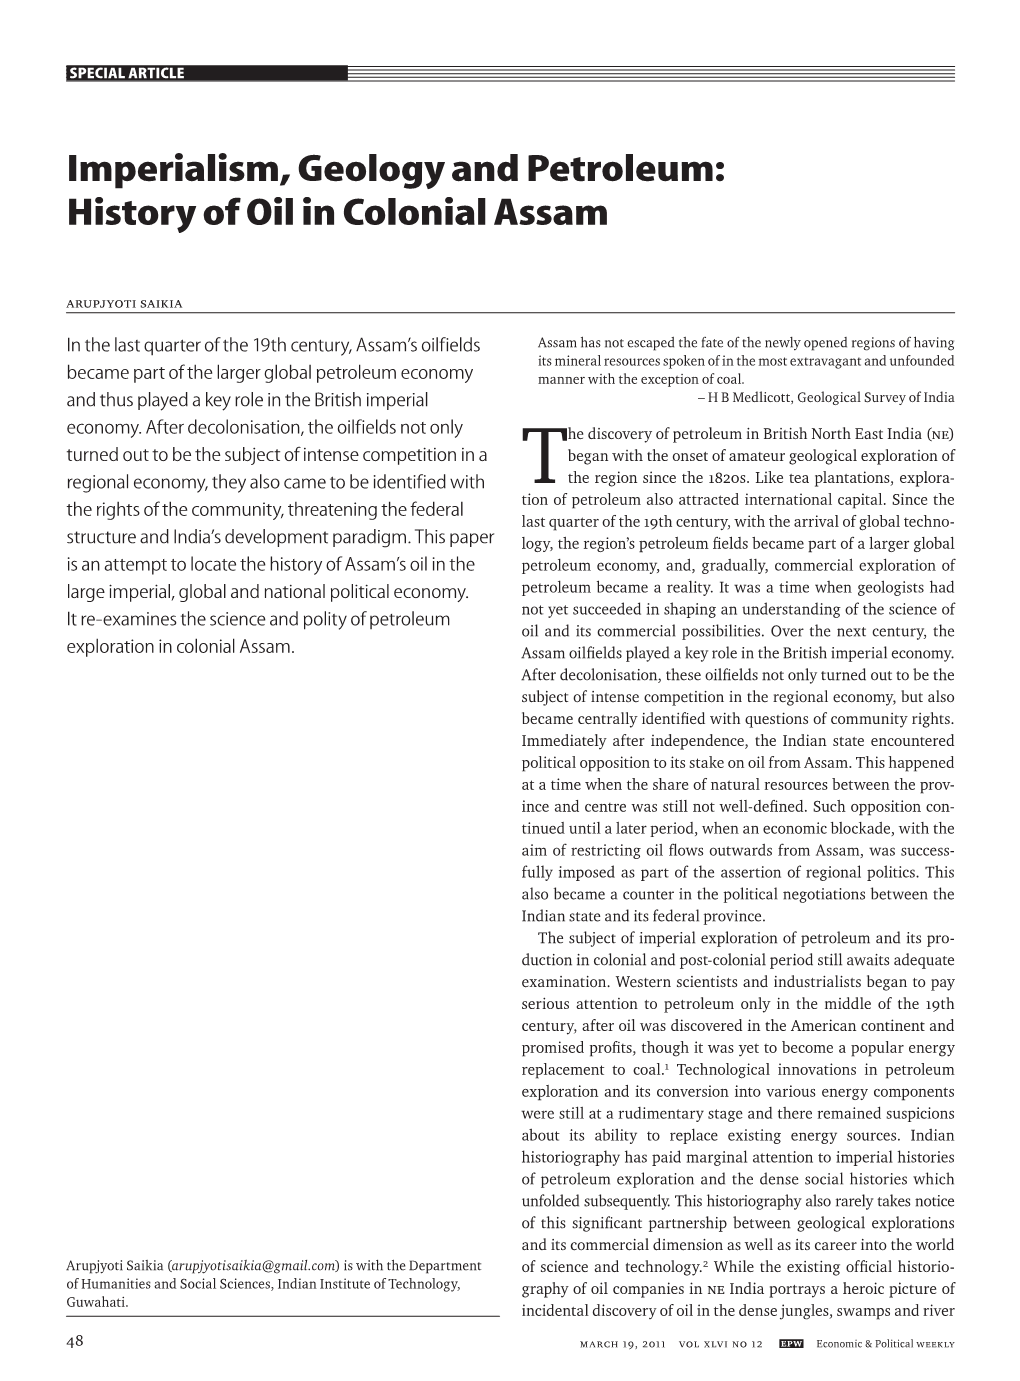 Imperialism, Geology and Petroleum: History of Oil in Colonial Assam